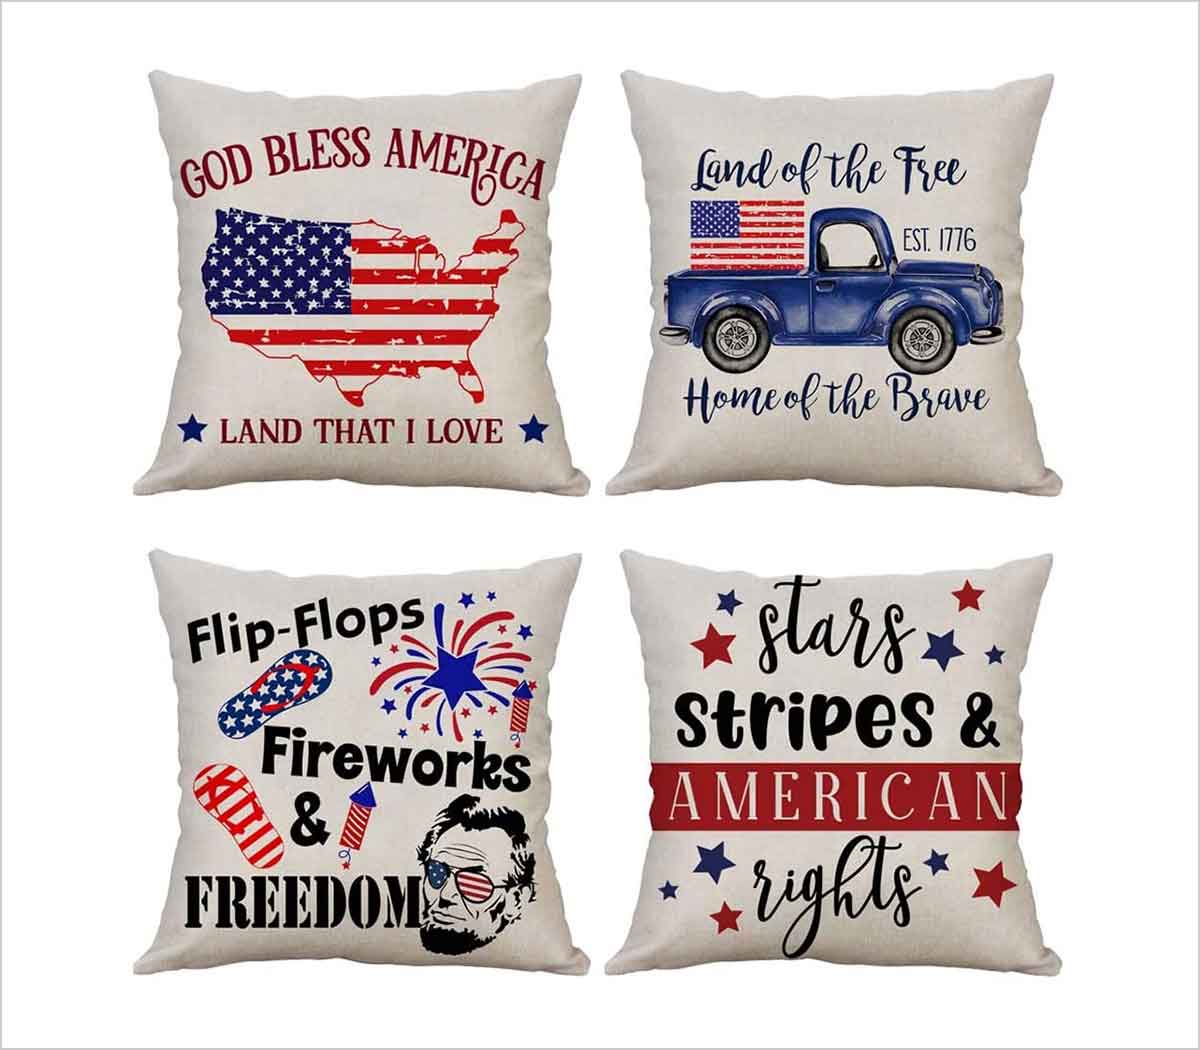 Gz party Patriotic American Flag Pillow Cover 18 x 18 inch,Home Decorative Throw Pillow Cover USA Flag Burlap Cotton Linen Cushion for Couch/Sofa/Bedroom/Livingroom/Office/Car Square Pillow Case 